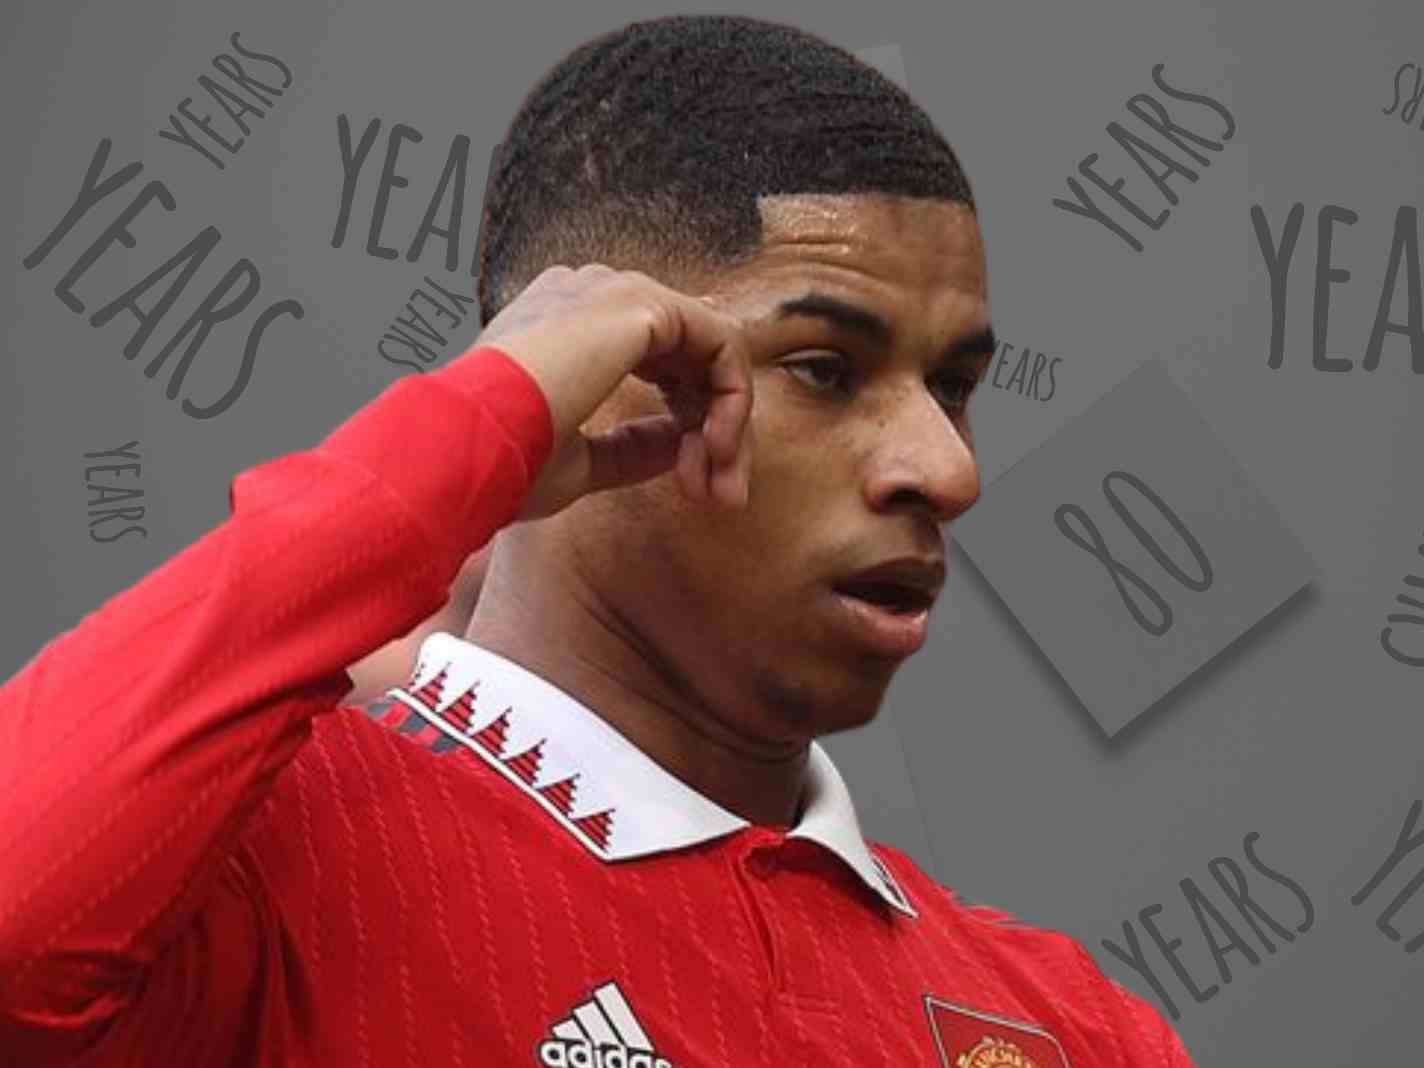 What’s With All The BS About Marcus Rashford’s Age On Twitter?